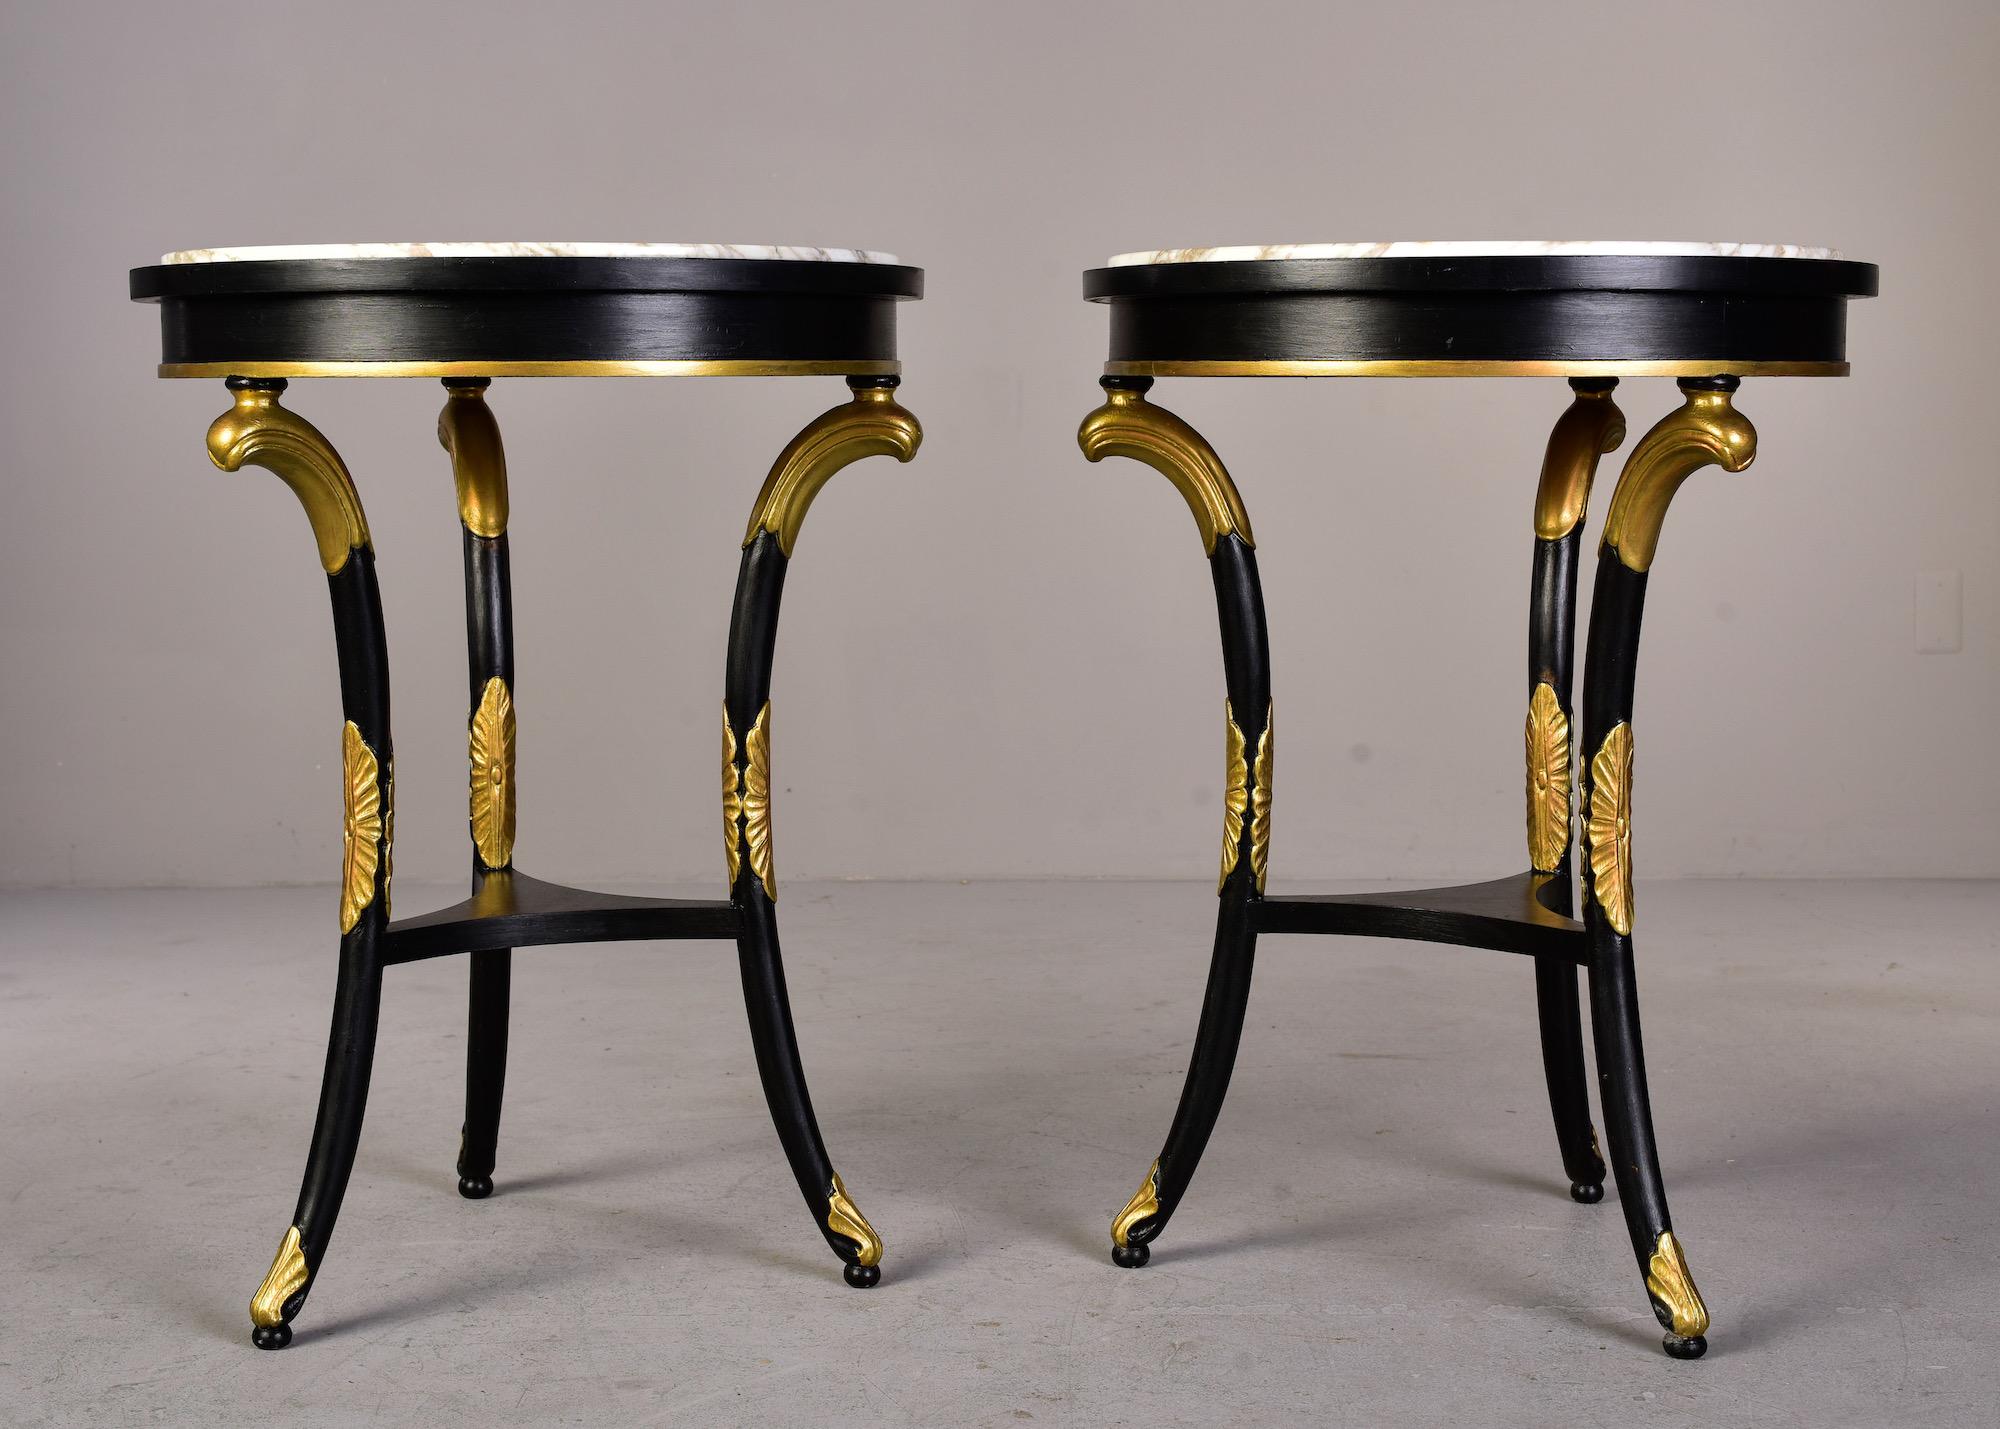 Pair Late 19th C Regency Ebonised Tables with Gilt Wood Fittings and Marble Tops For Sale 2